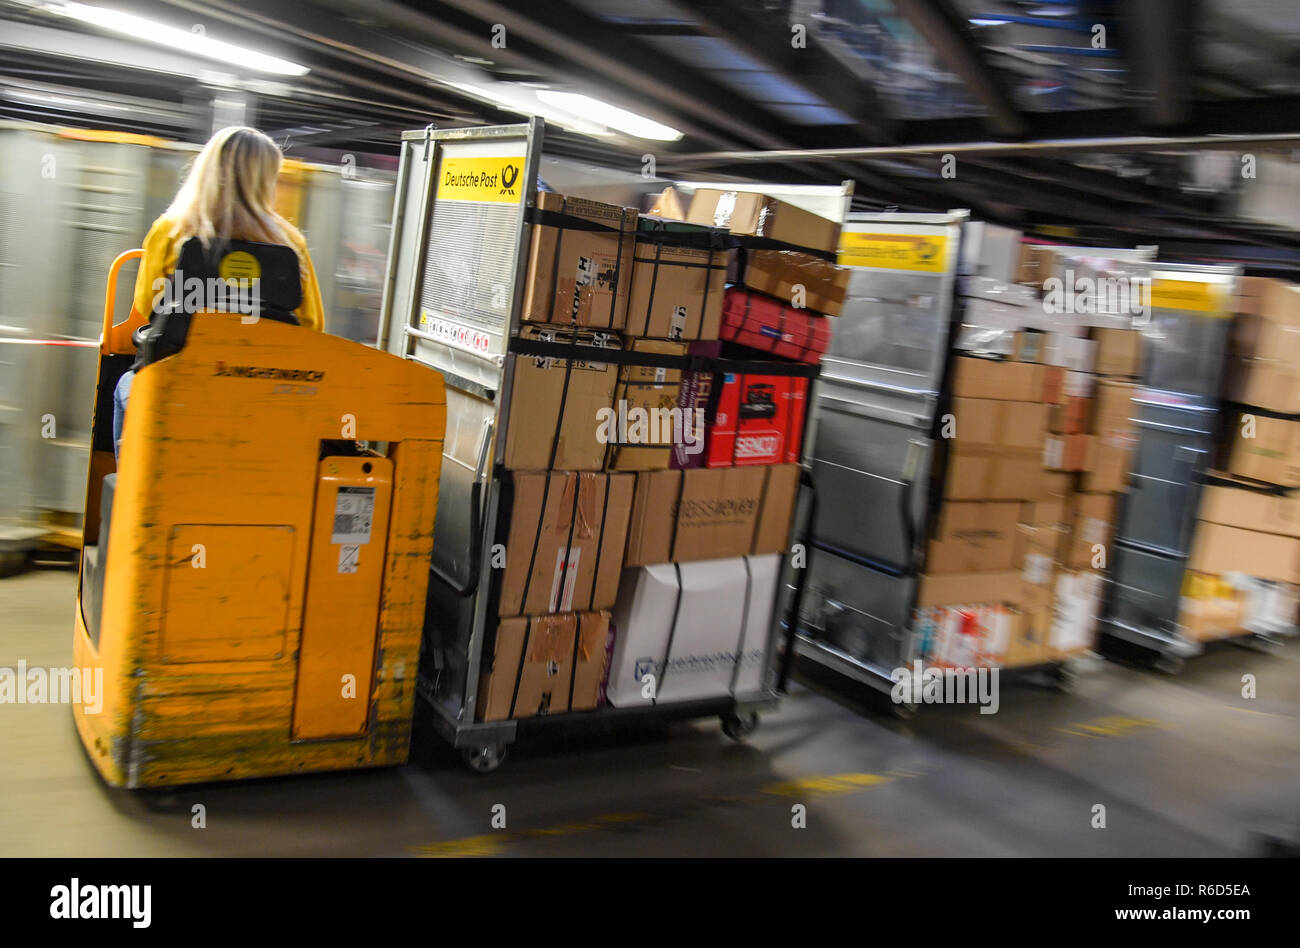 05 December 2018, Brandenburg, Rüdersdorf: An employee in the DHL-Paketzentrum drives transport wagons full of shipments through the hall. Let's get on with the parcels and packages: For the employees of parcel centres, it's time to roll up their sleeves again. For example at the DHL location in Rüdersdorf, Brandenburg (Märkisch-Oderland). Up to 550,000 parcels are processed here every day before Christmas. This year, the volume of consignments is again around ten percent higher than in the previous year. Photo: Patrick Pleul/dpa-Zentralbild/ZB Stock Photo